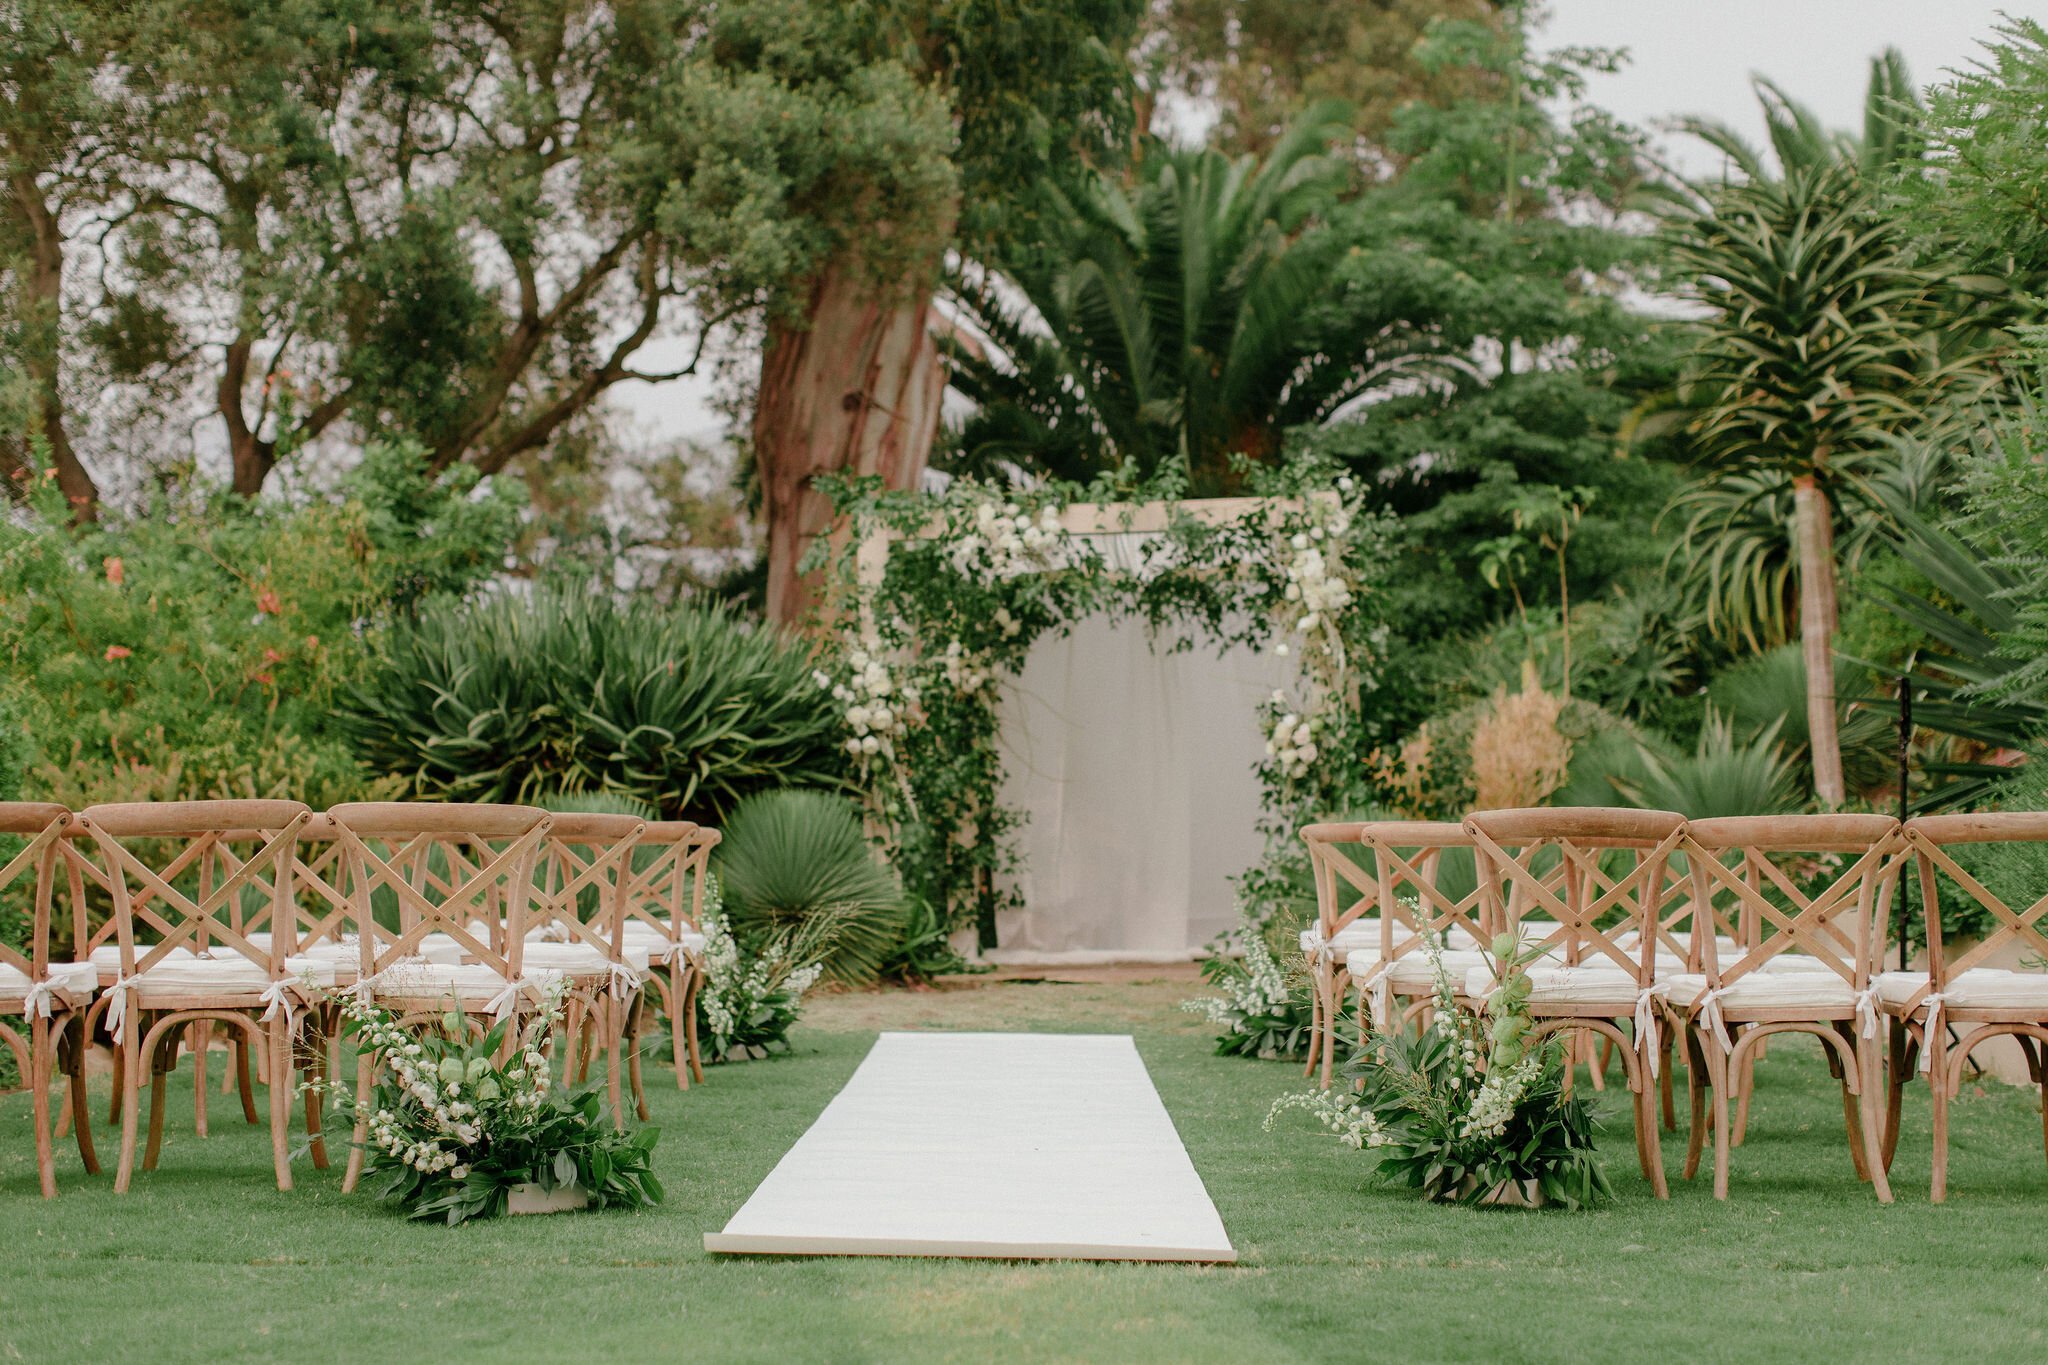 www.santabarbaraweddings.com | Chris J. Evans | Private Residence | Ashley Chanel Events | Rogue &amp; Fox | The Ceremony Set Up 